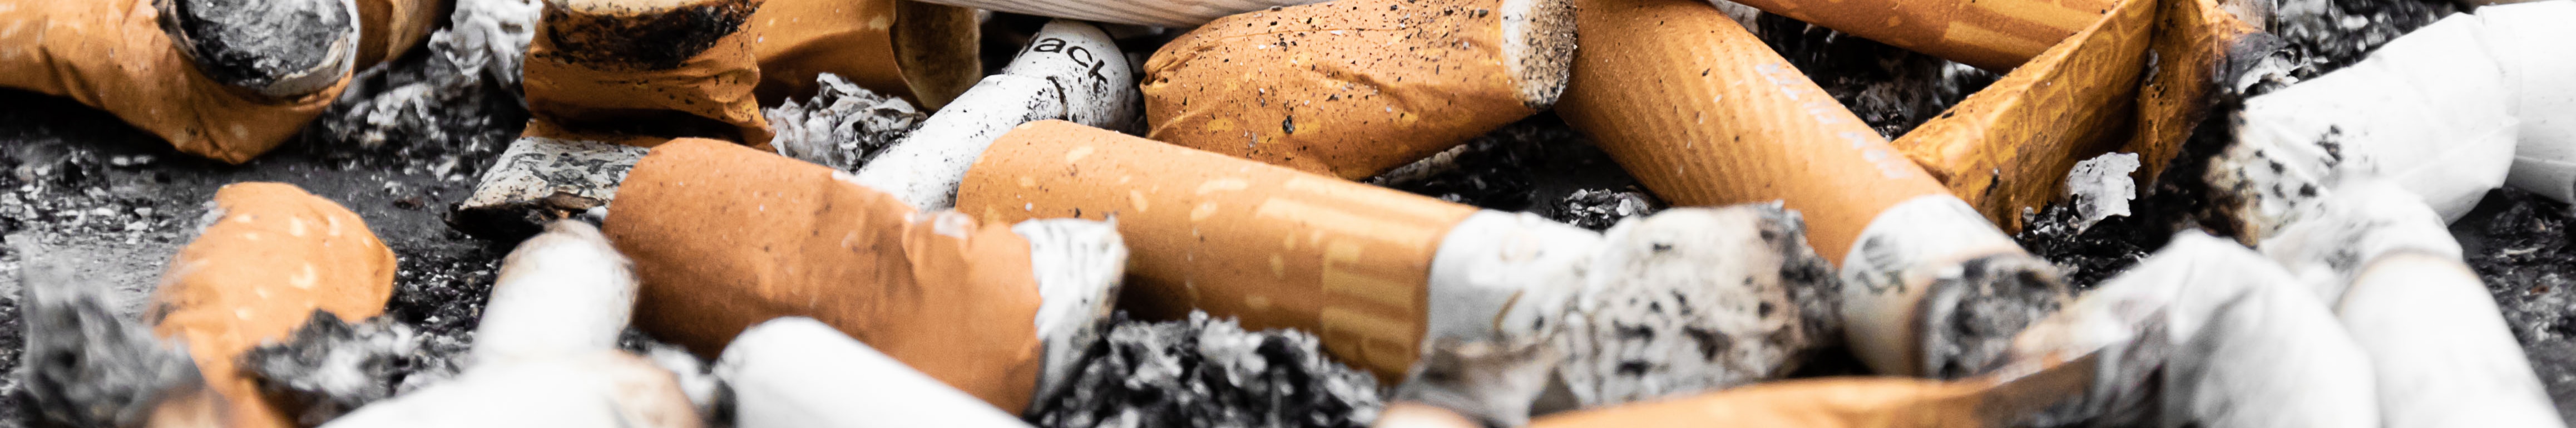 Japan Tobacco's end-of-life waste amounted to an estimated 260,000 tonnes in 2021